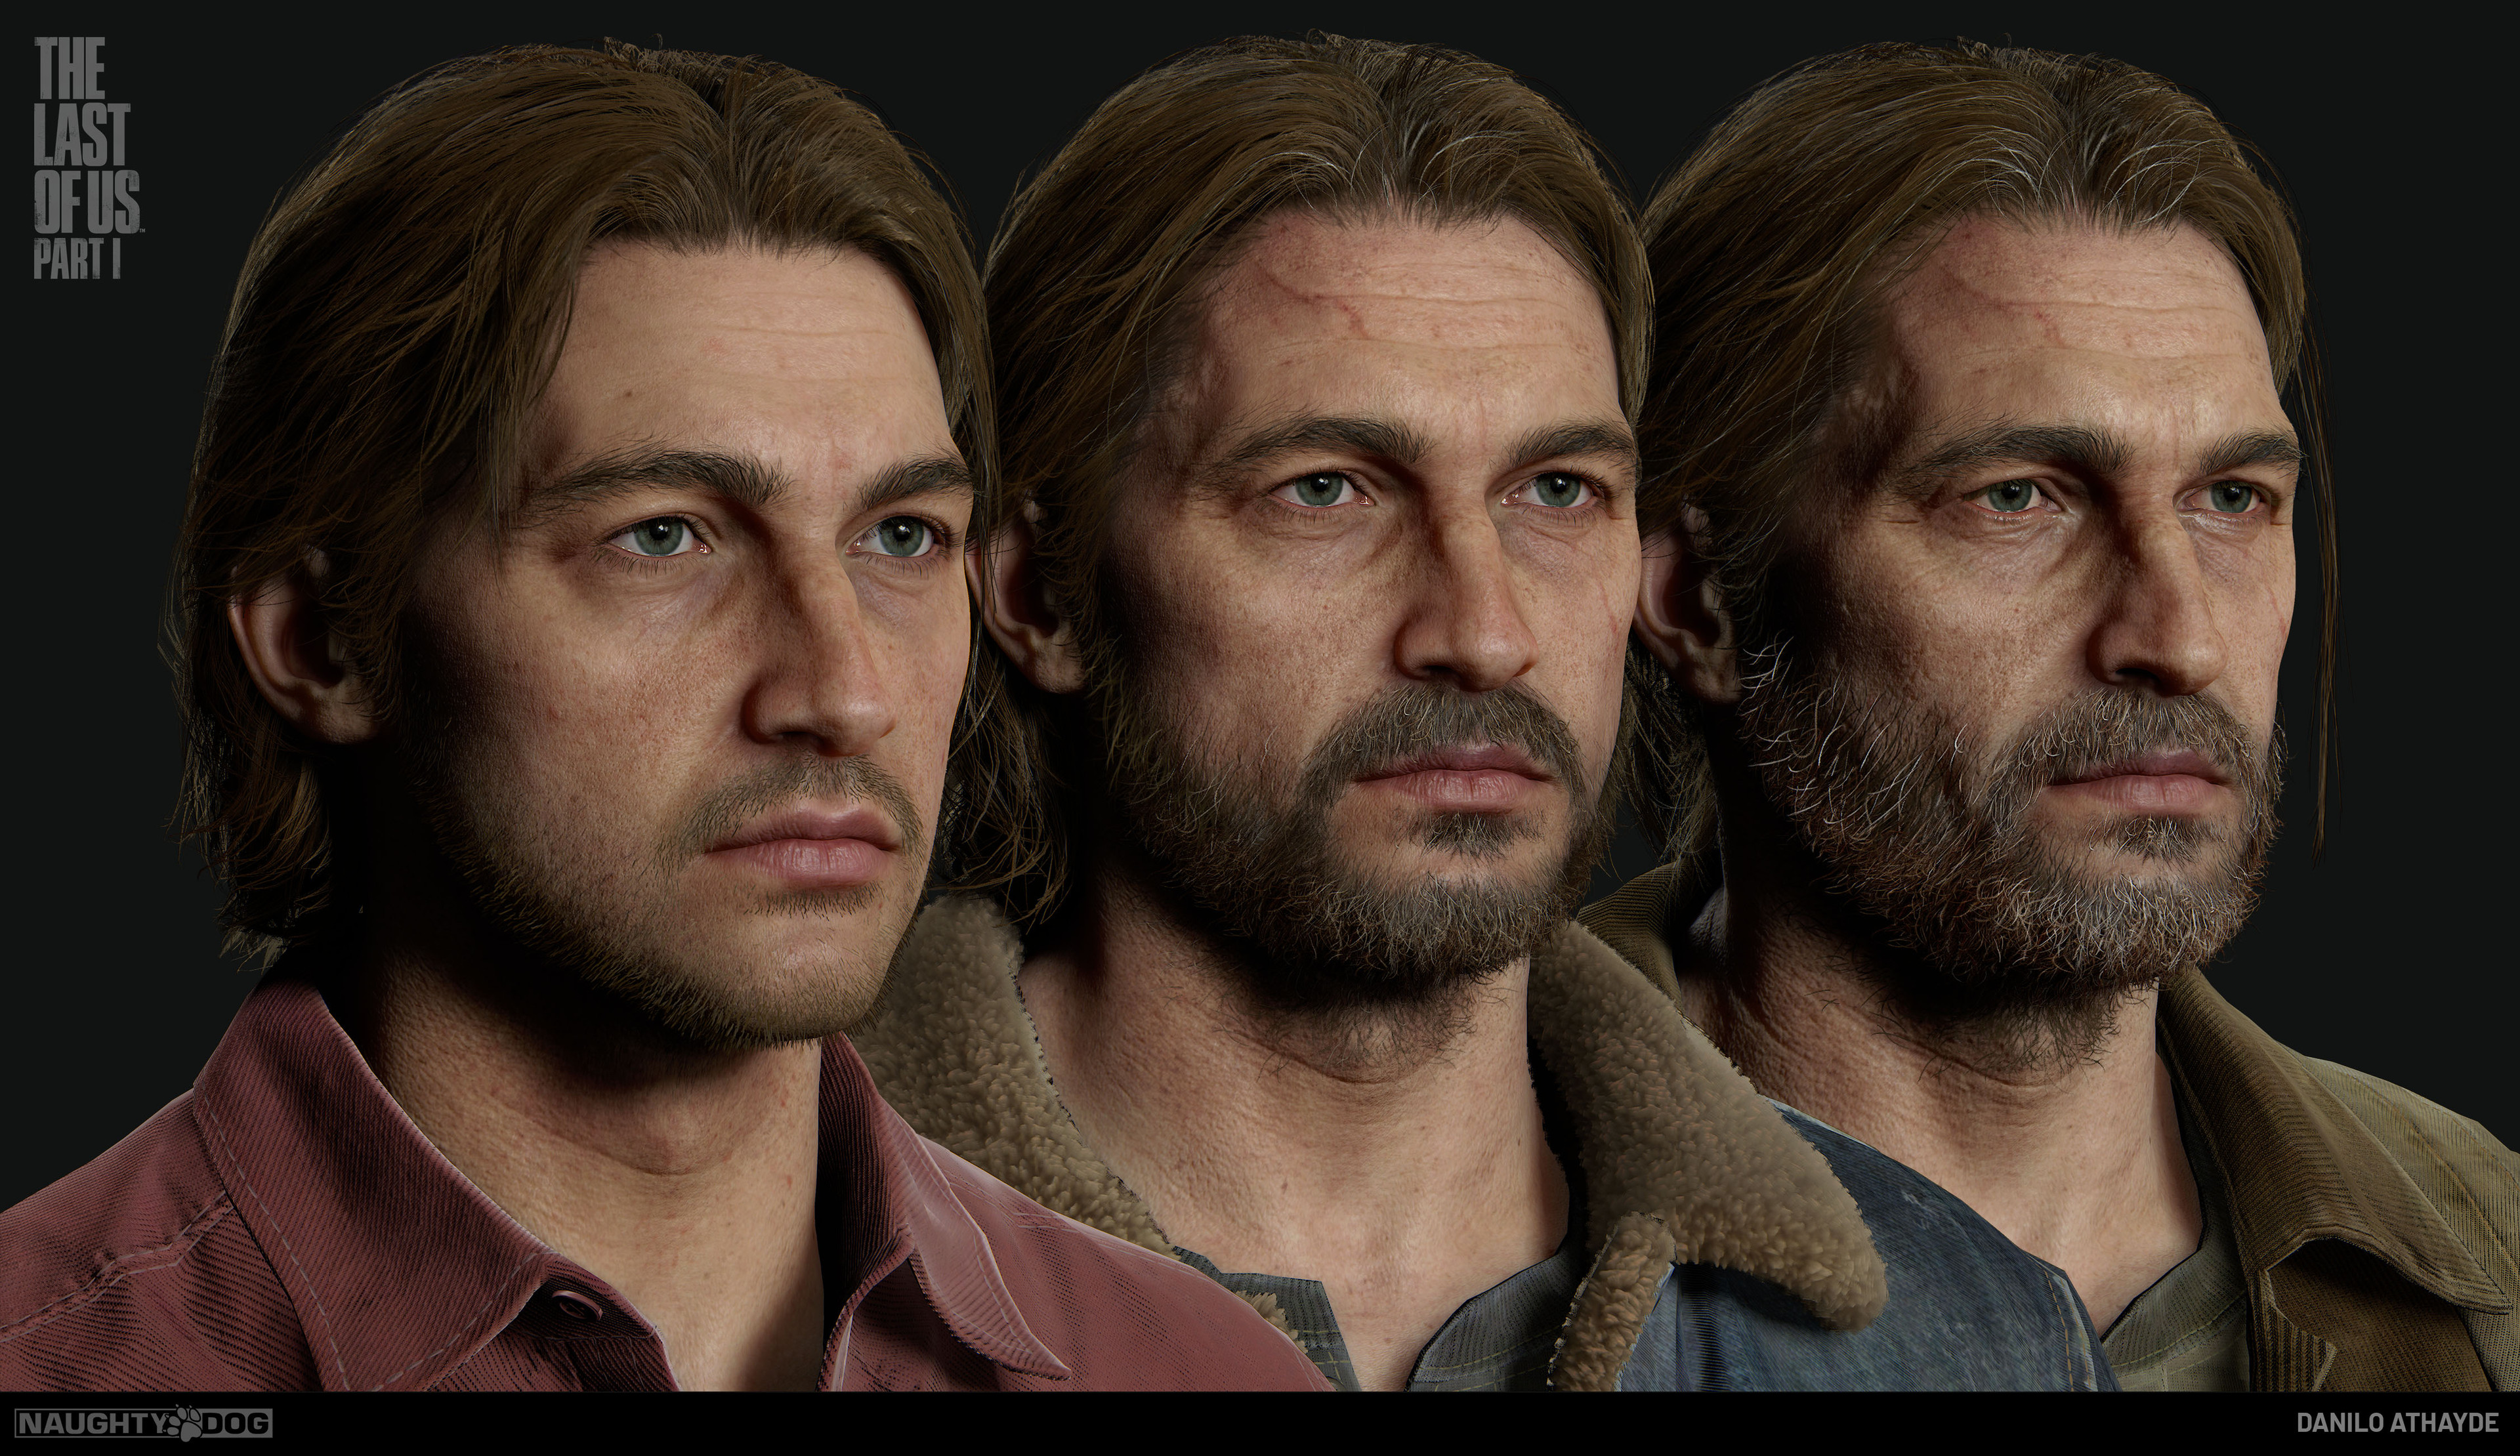 ArtStation - Tommy, Danilo Athayde  The last of us, Game costumes, The  lest of us